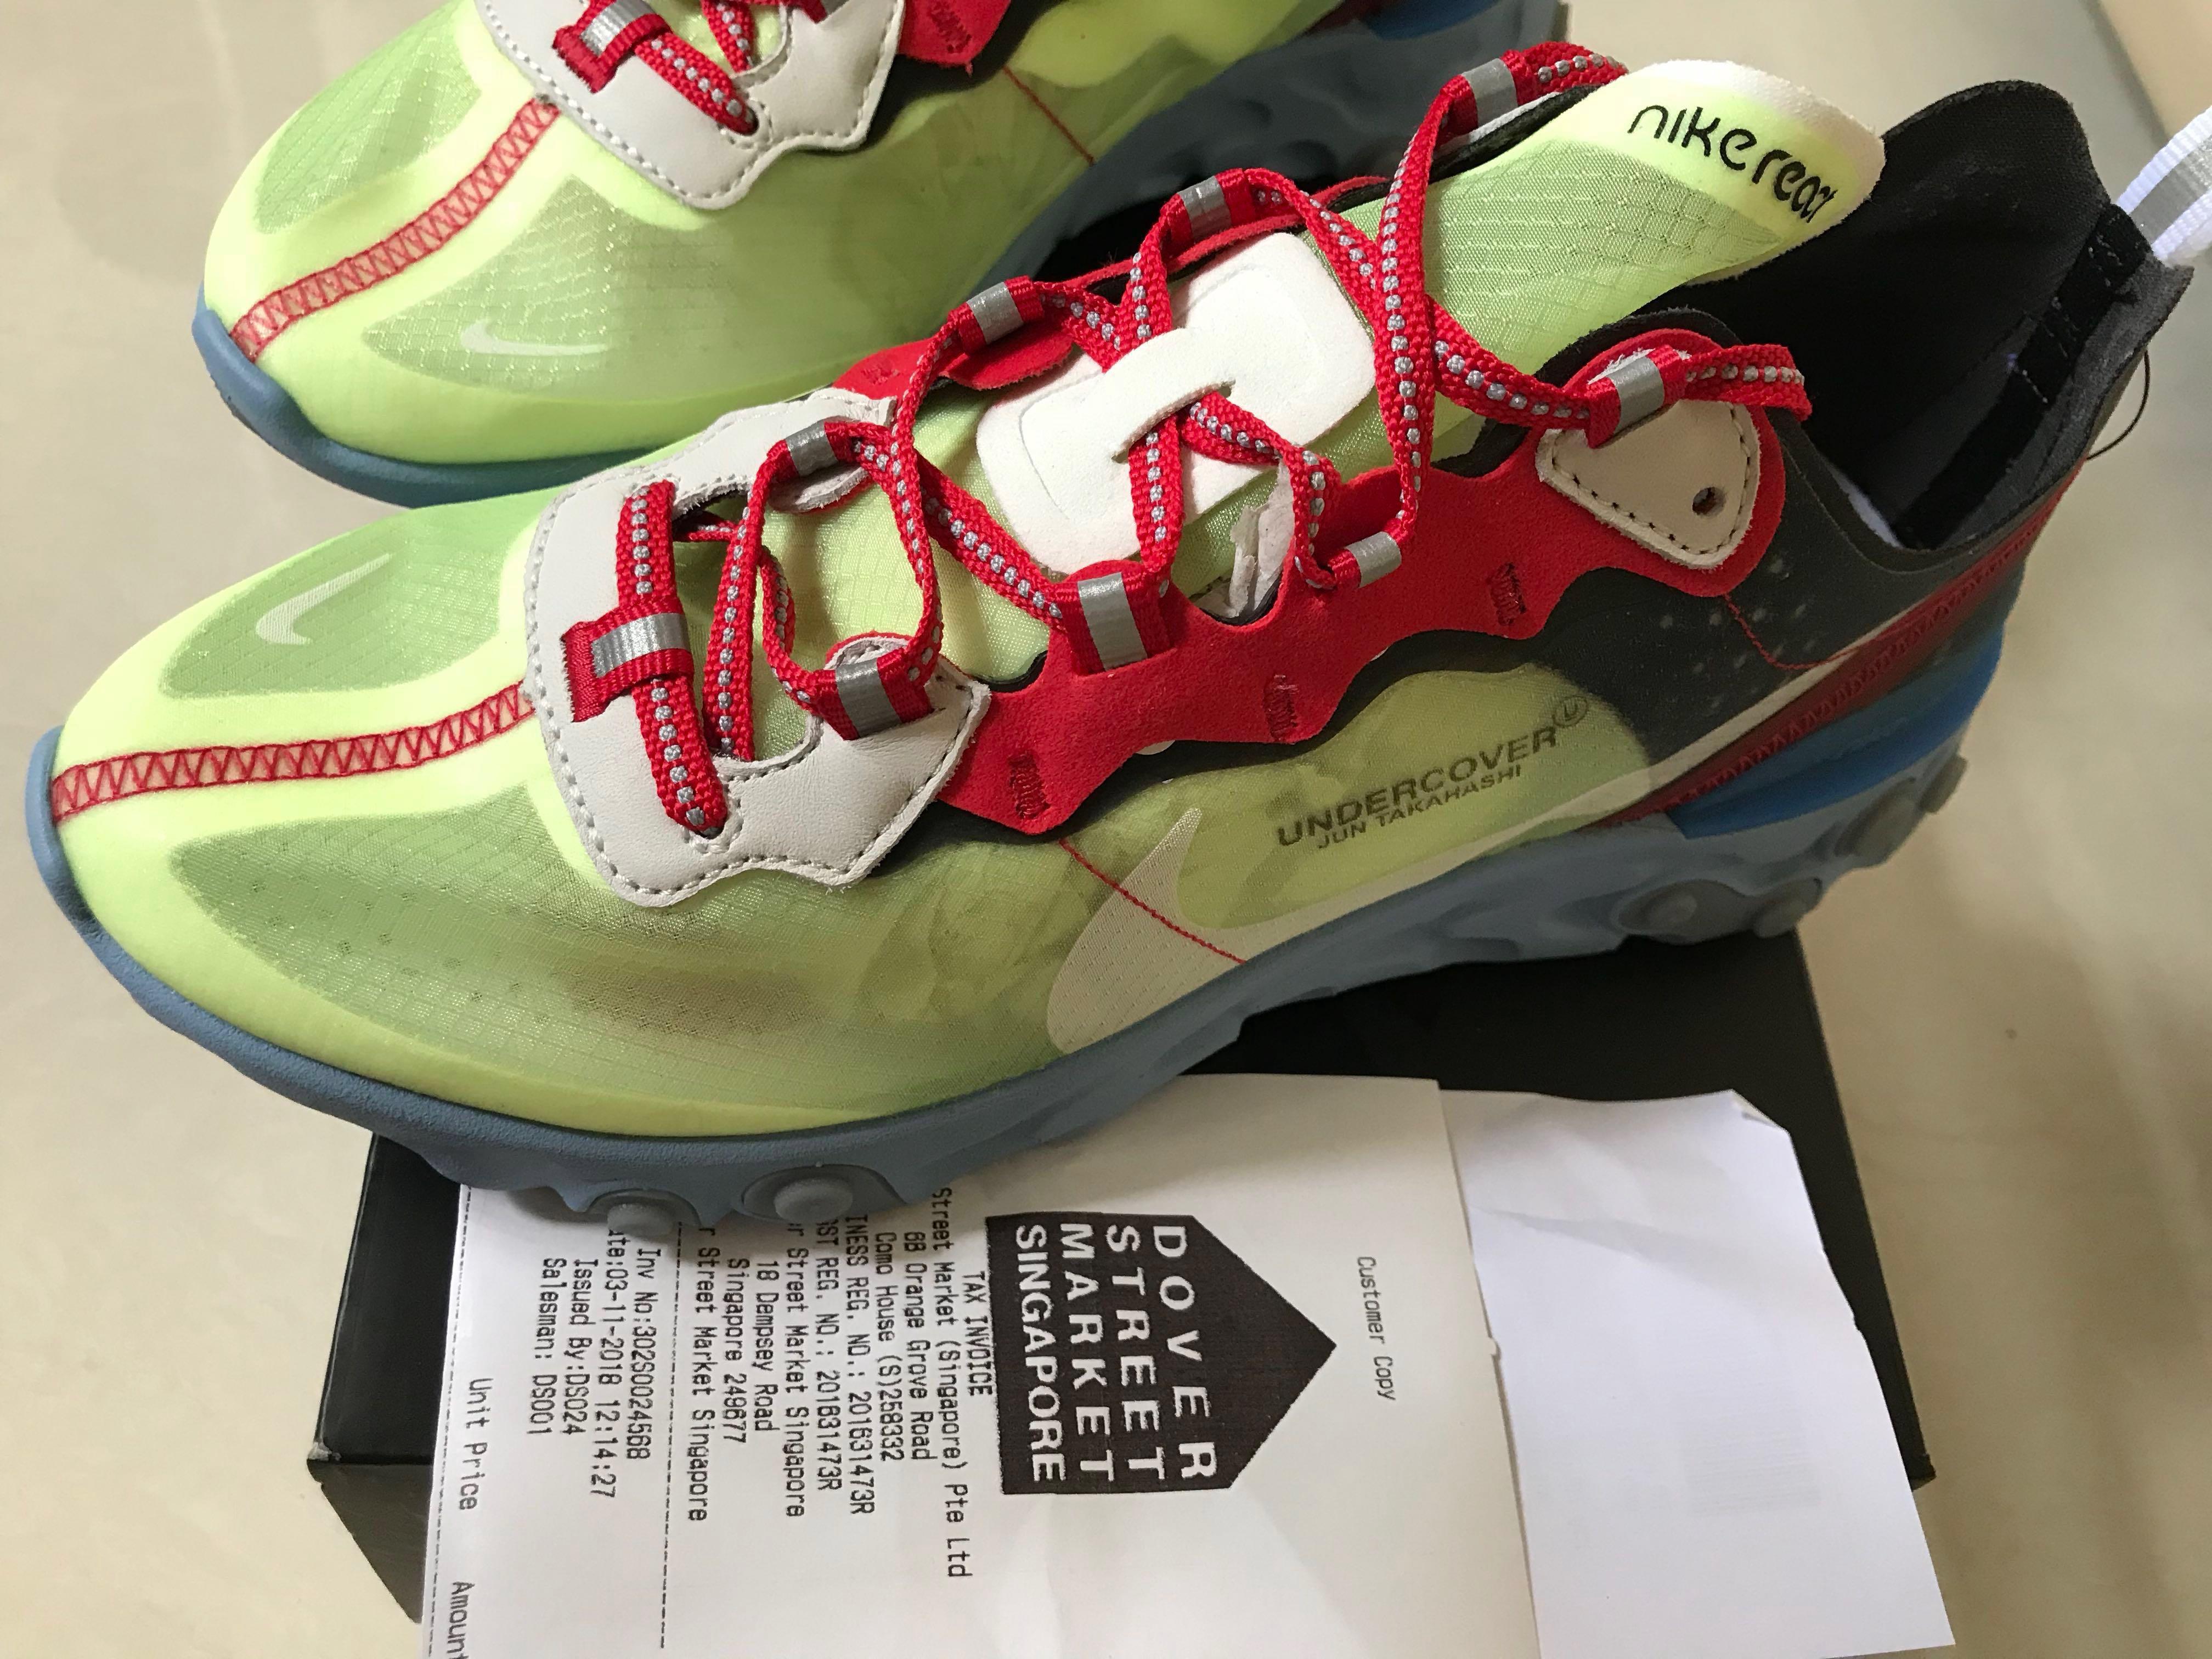 Undercover X Nike react element US 7.5 